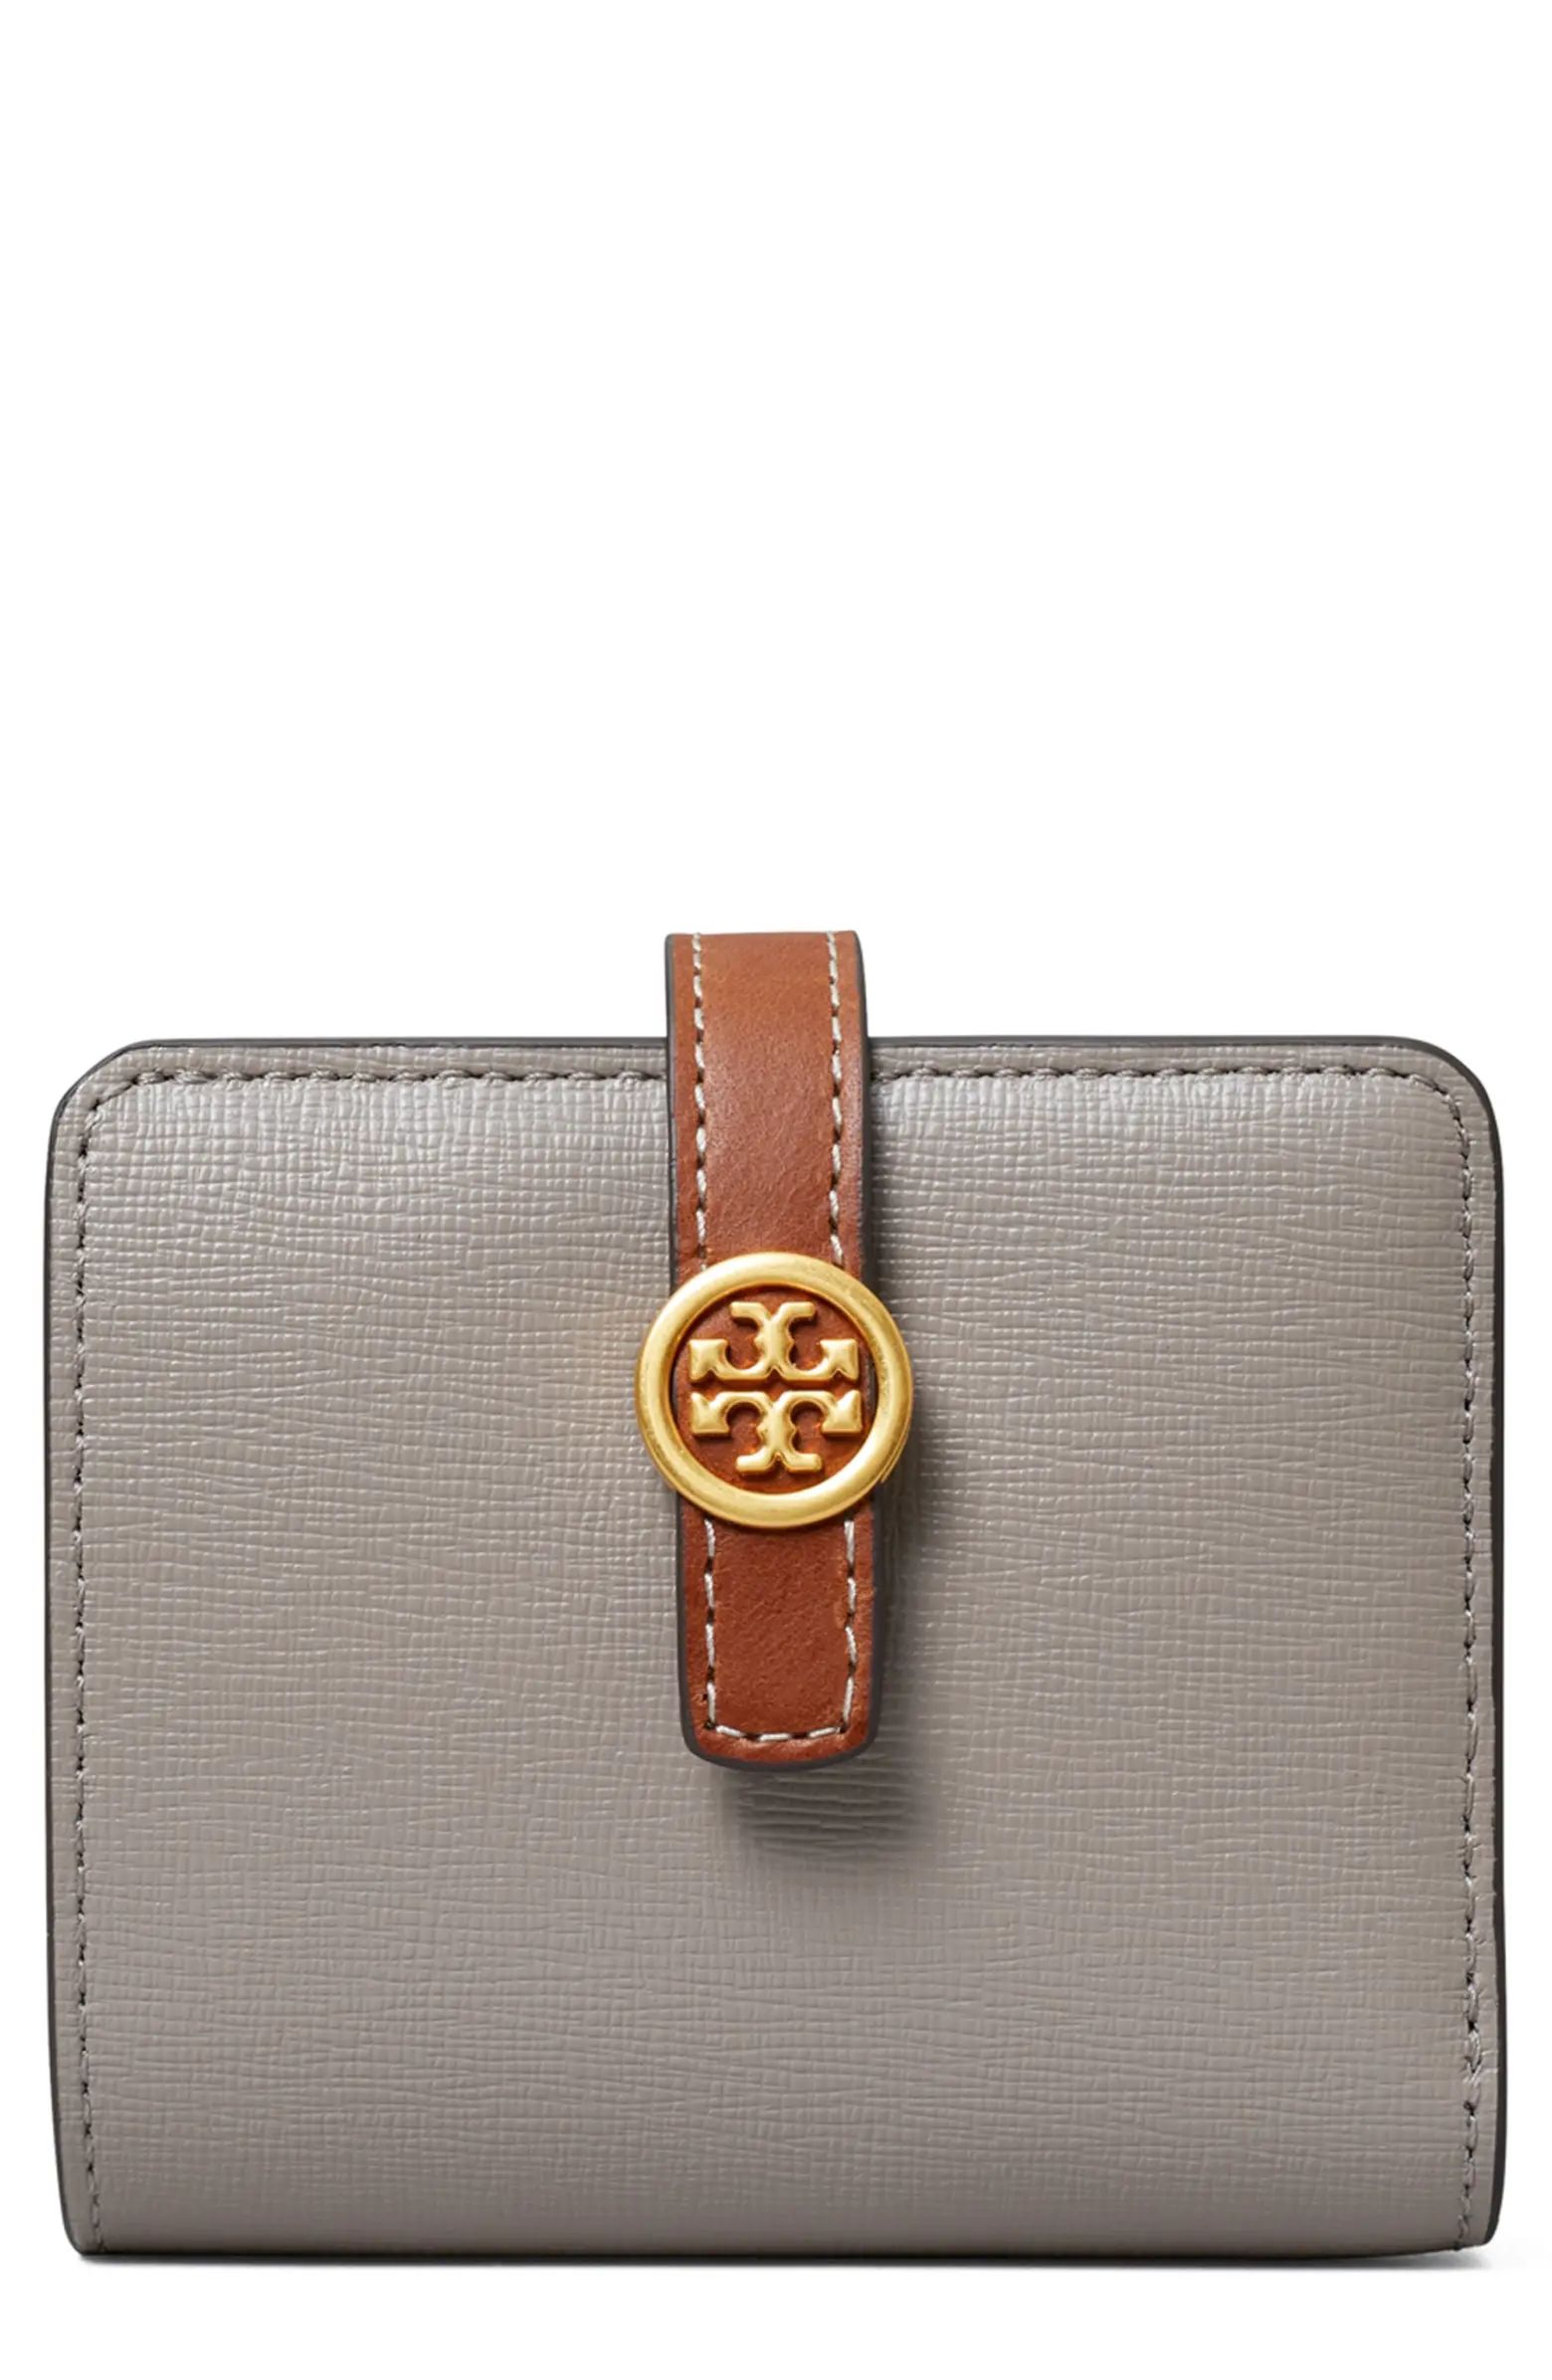 Tory Burch Mini Robinson Leather Wallet | Nordstrom | Nordstrom